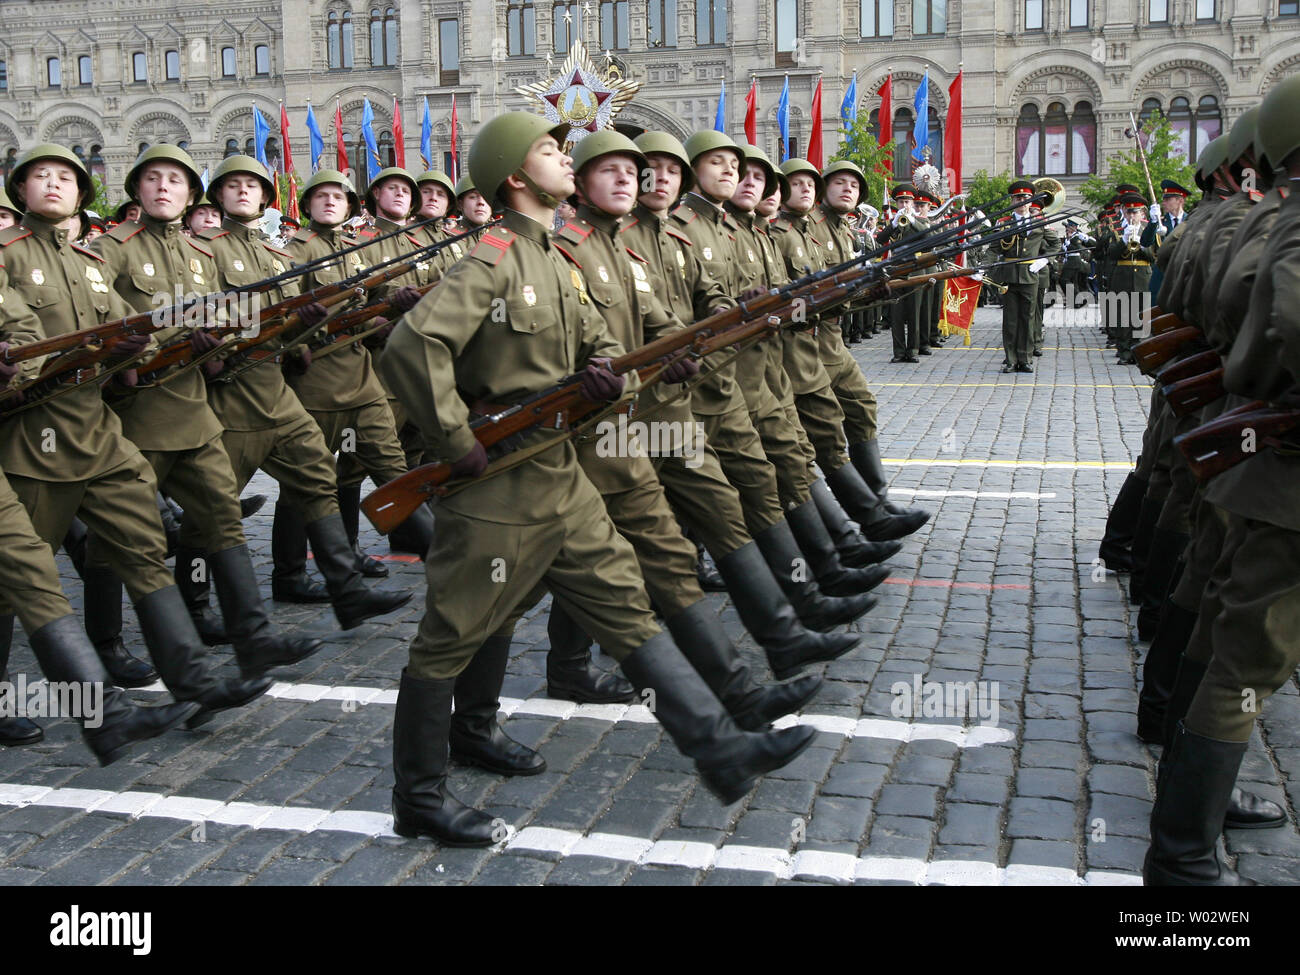 Wearing Red Army World War II era uniforms Russian troops march in the annual Victory Day parade in Square in Moscow on May 9, 2008. Warplanes screamed over Red Square